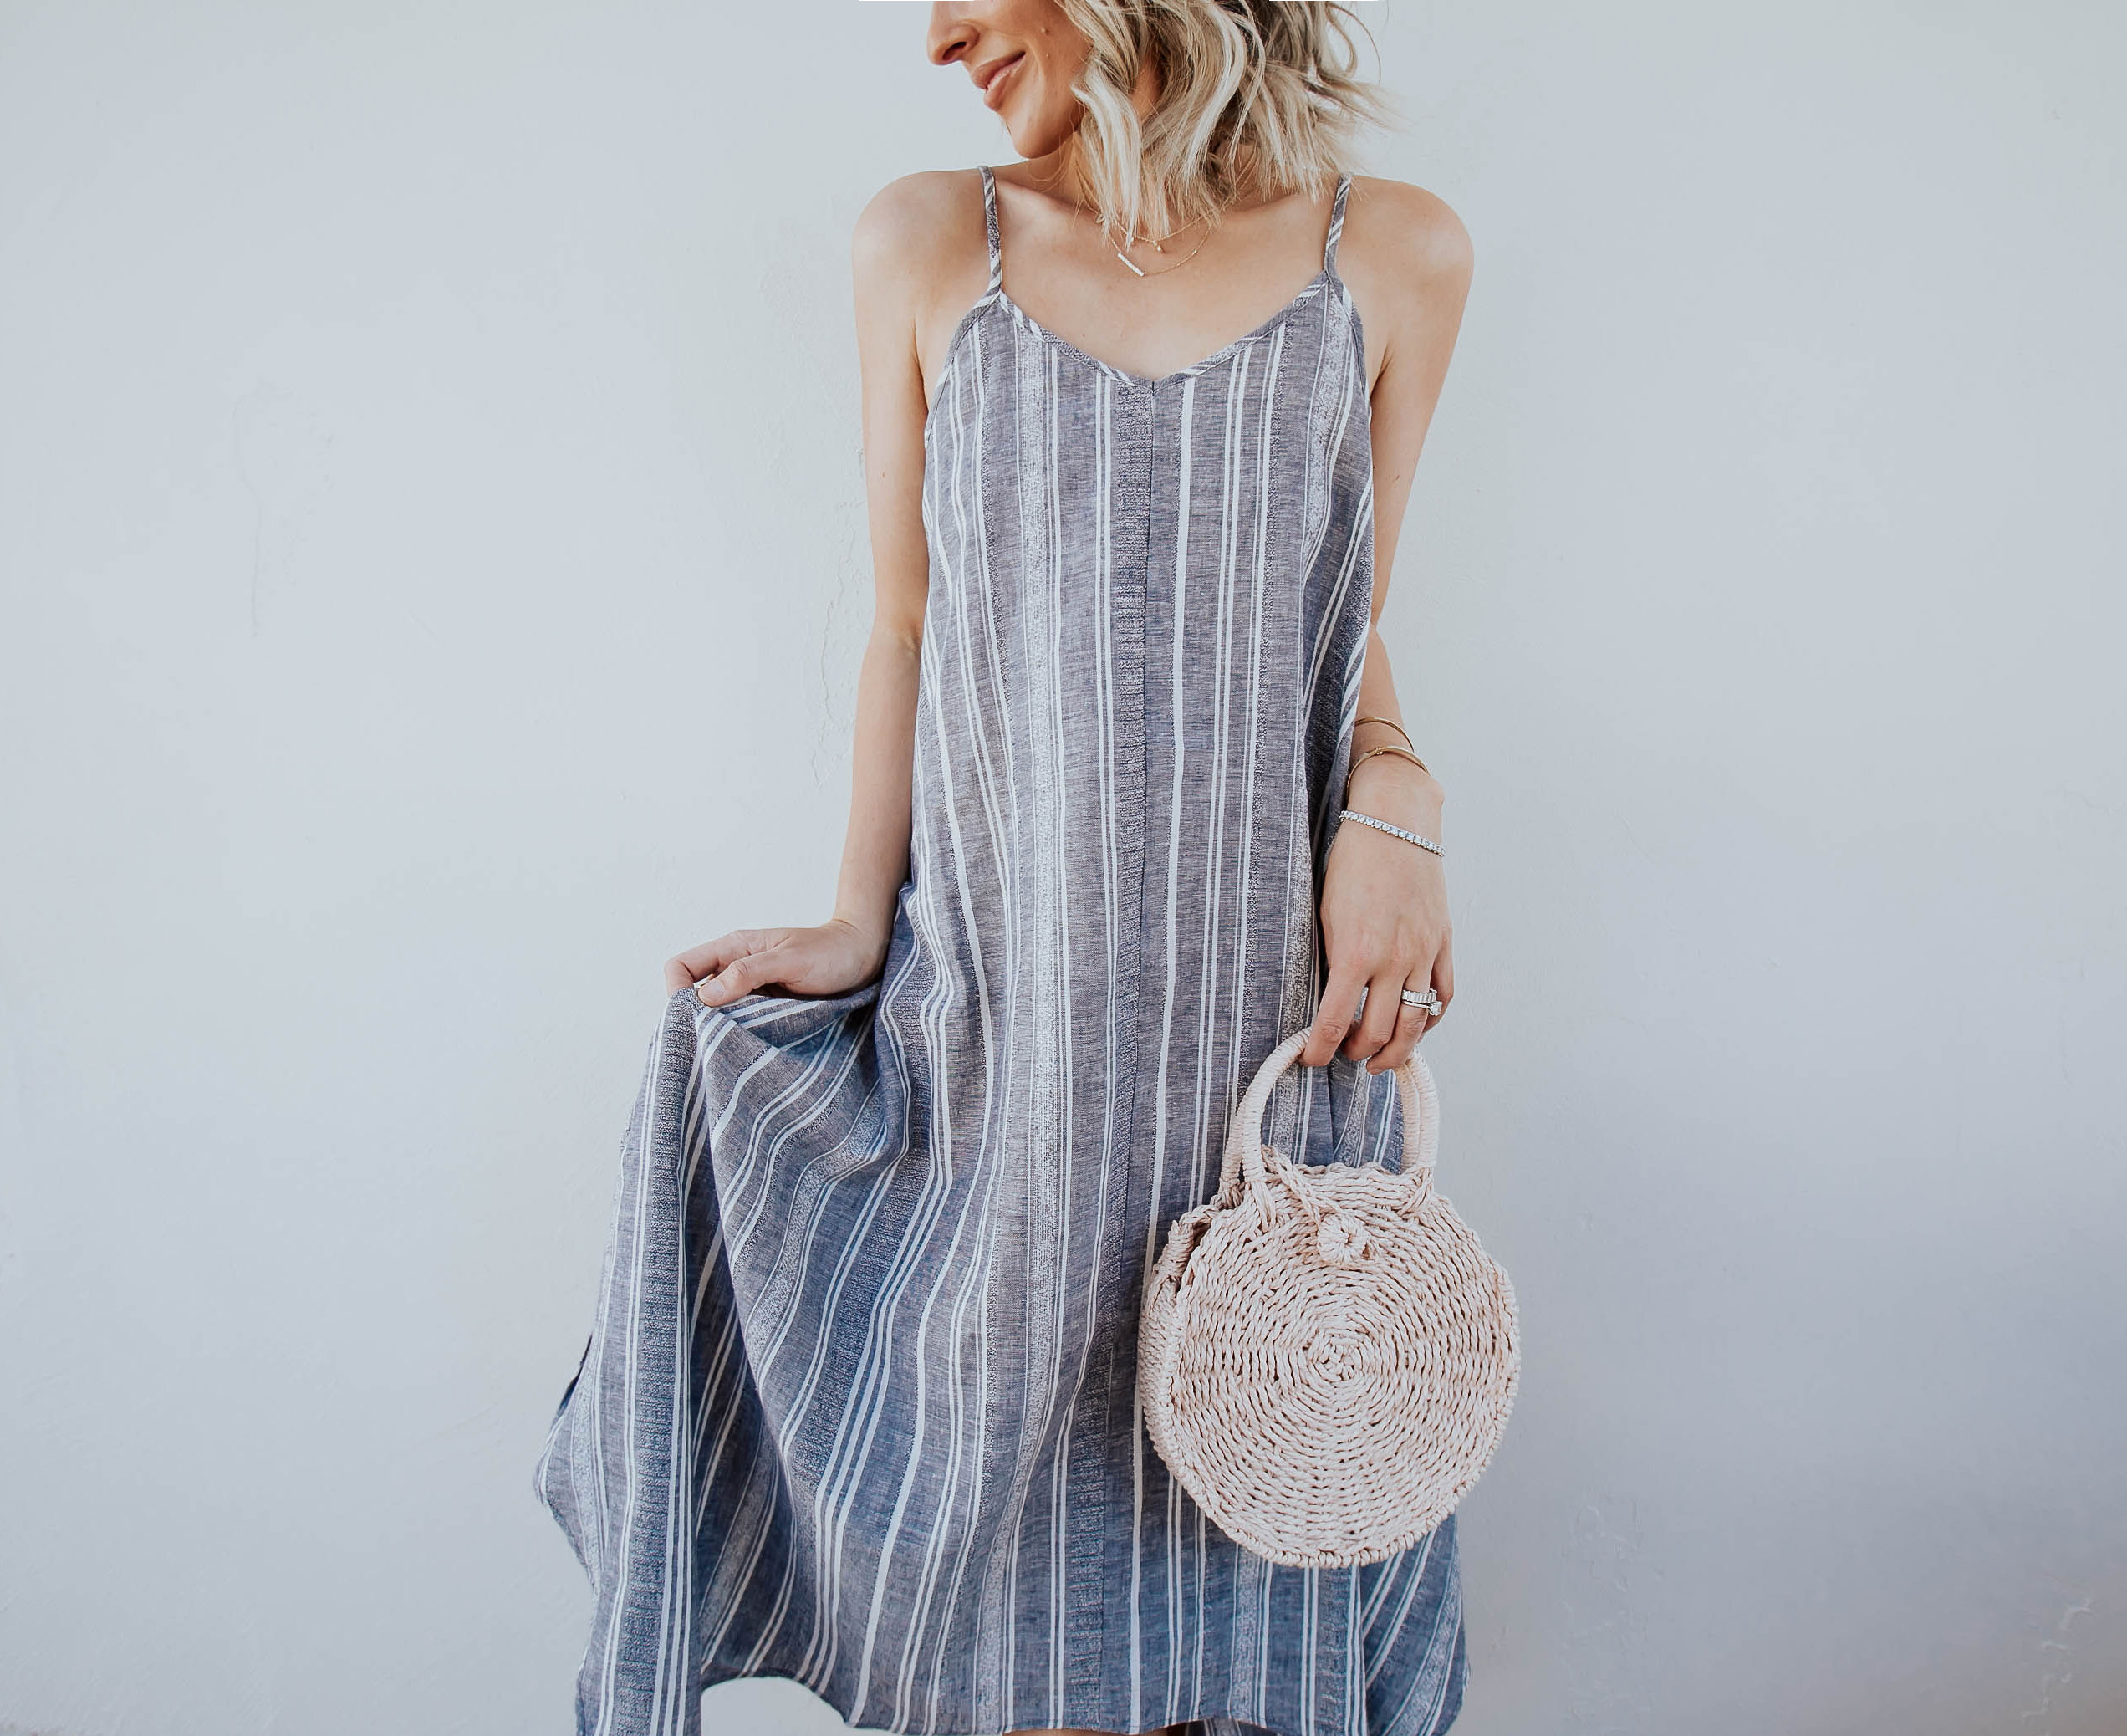 Reno, Nevada Blogger, Emily Farren Wieczorek of Two Peas in a Prada shares one of her favorite buys for summer - this $17 Tank Dress from WalMart